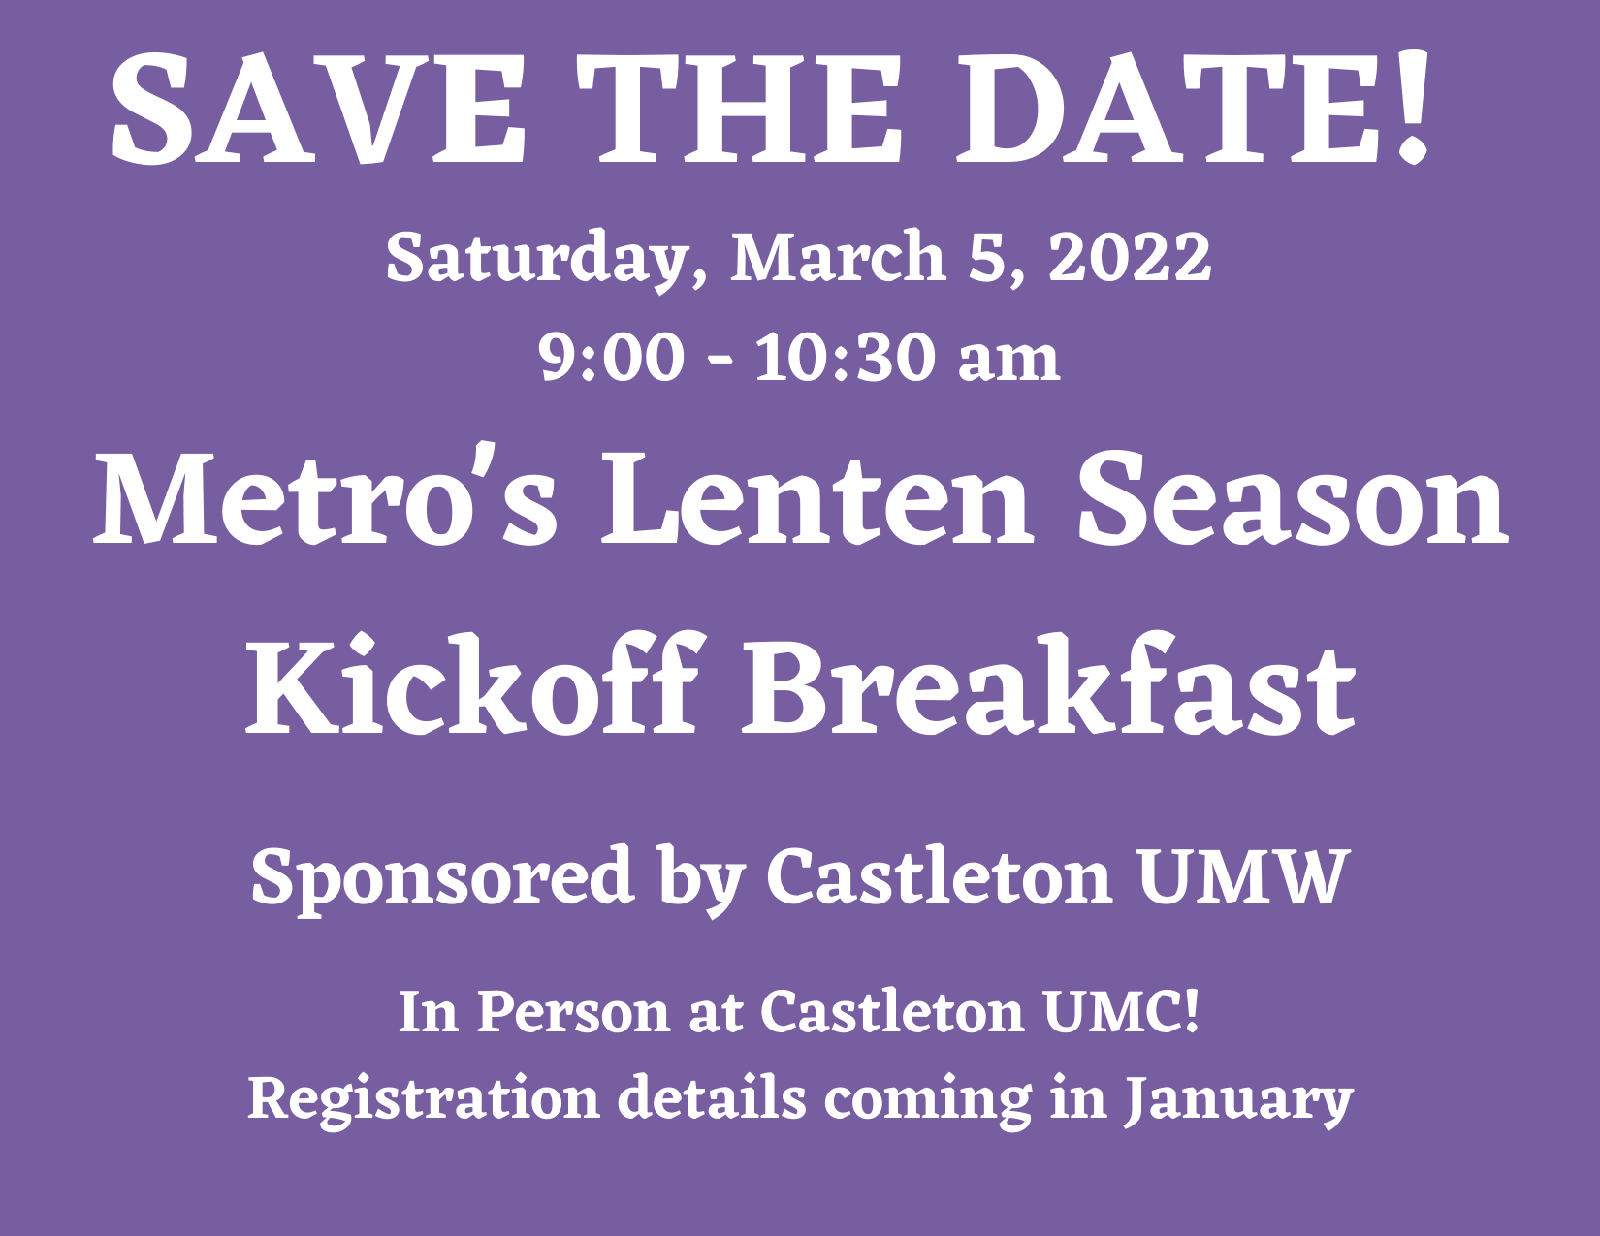 lenten%20kickoff%20save%20the%20date.png